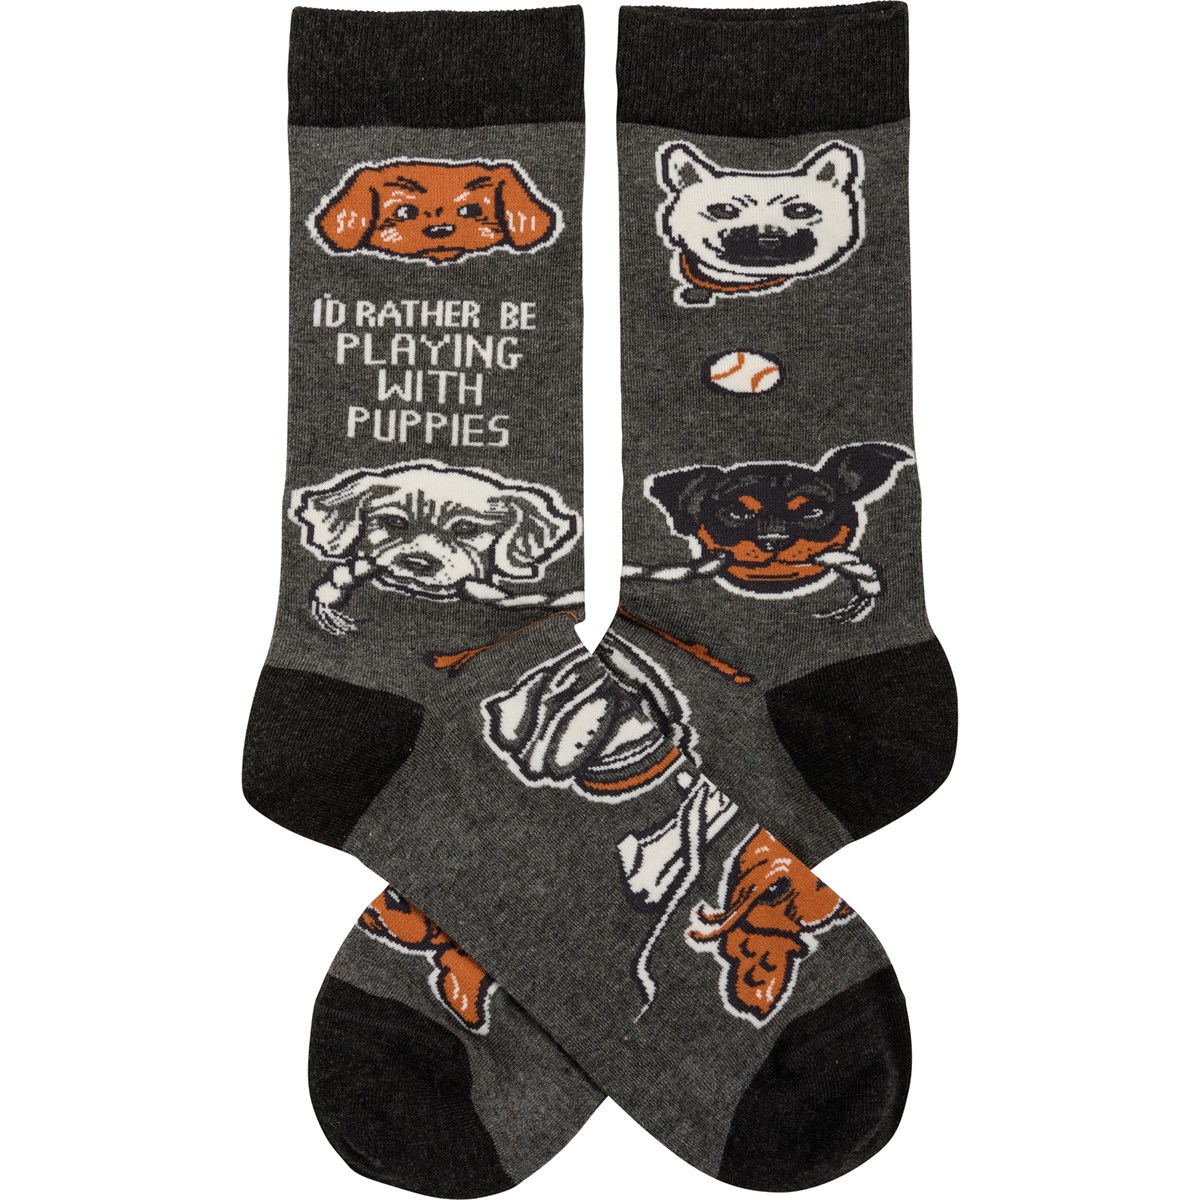 Socks - I'd Rather Be Playing With Puppies - One Size Fits Most - Cotton, Nylon, Spandex